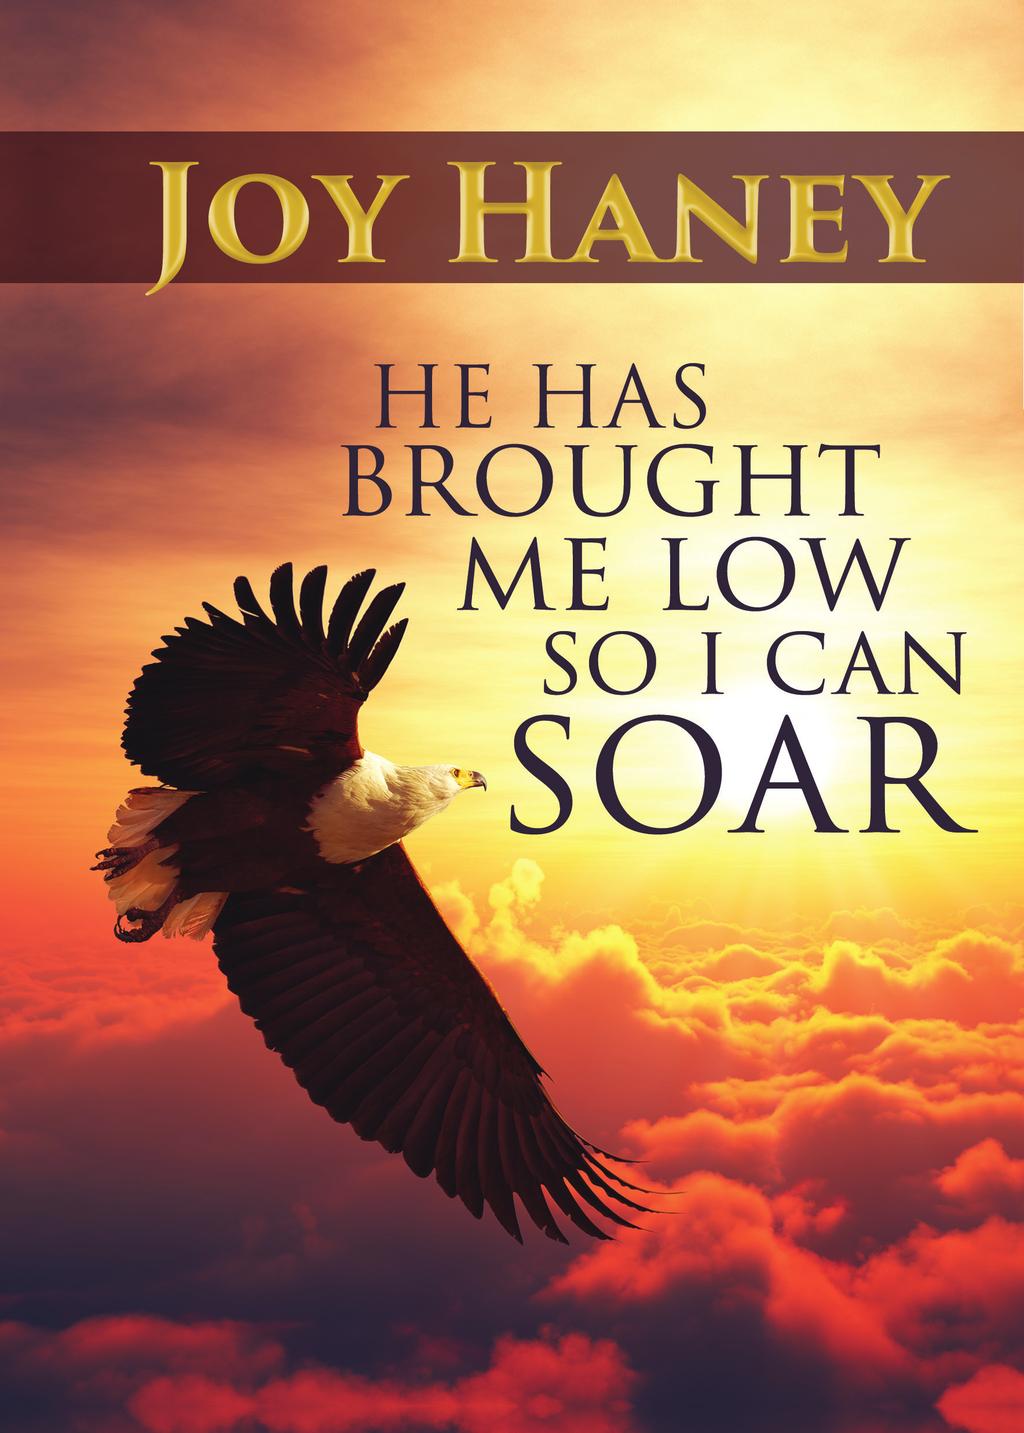 HE HAS BROUGHT ME LOW SO I CAN SOAR Sister Haney weaves an unmistakable story of faith and trust while sharing her personal life experiences and citing the similarities between her life and ours